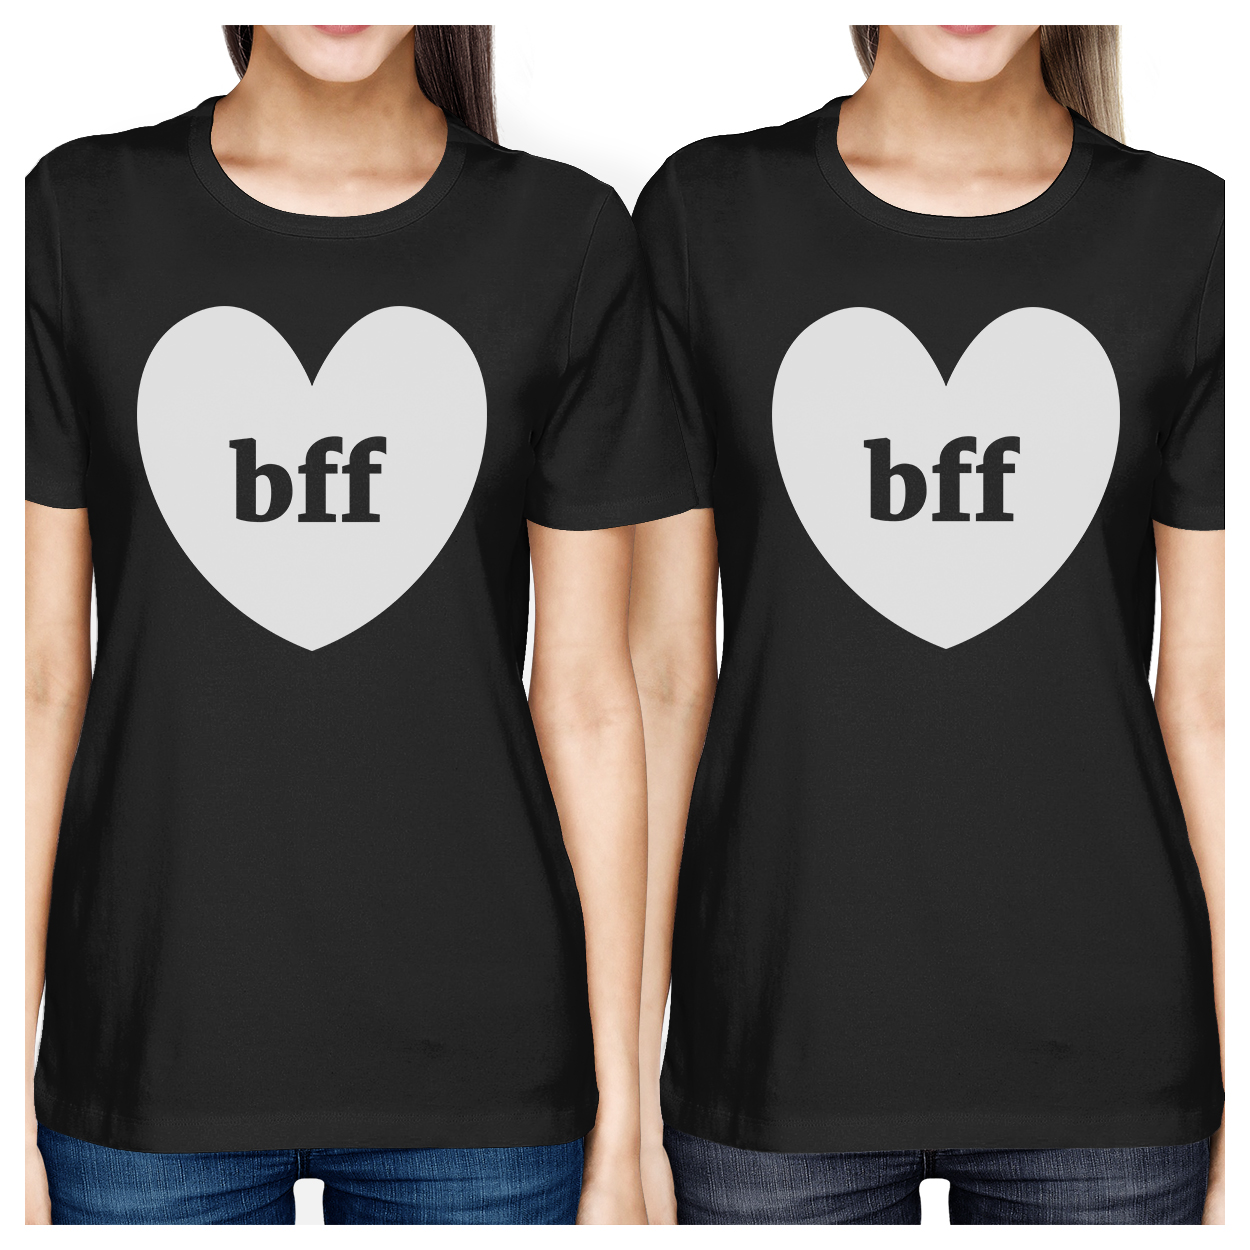 Bff Hearts Cute BFF Matching Tee Shirts Black Funny Birthday Gifts - image 1 of 4